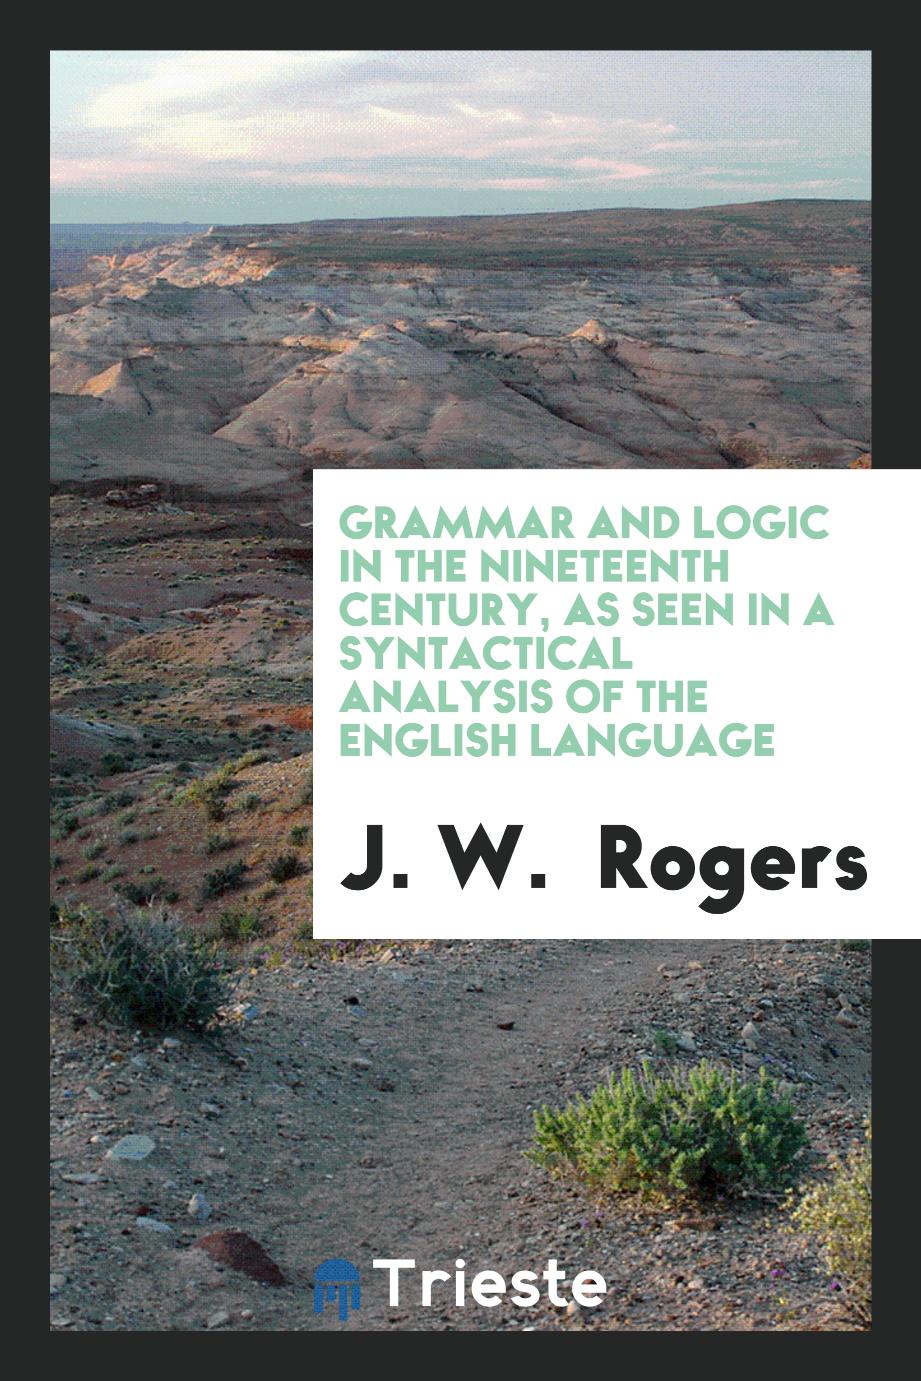 Grammar and logic in the nineteenth century, as seen in a syntactical analysis of the English language